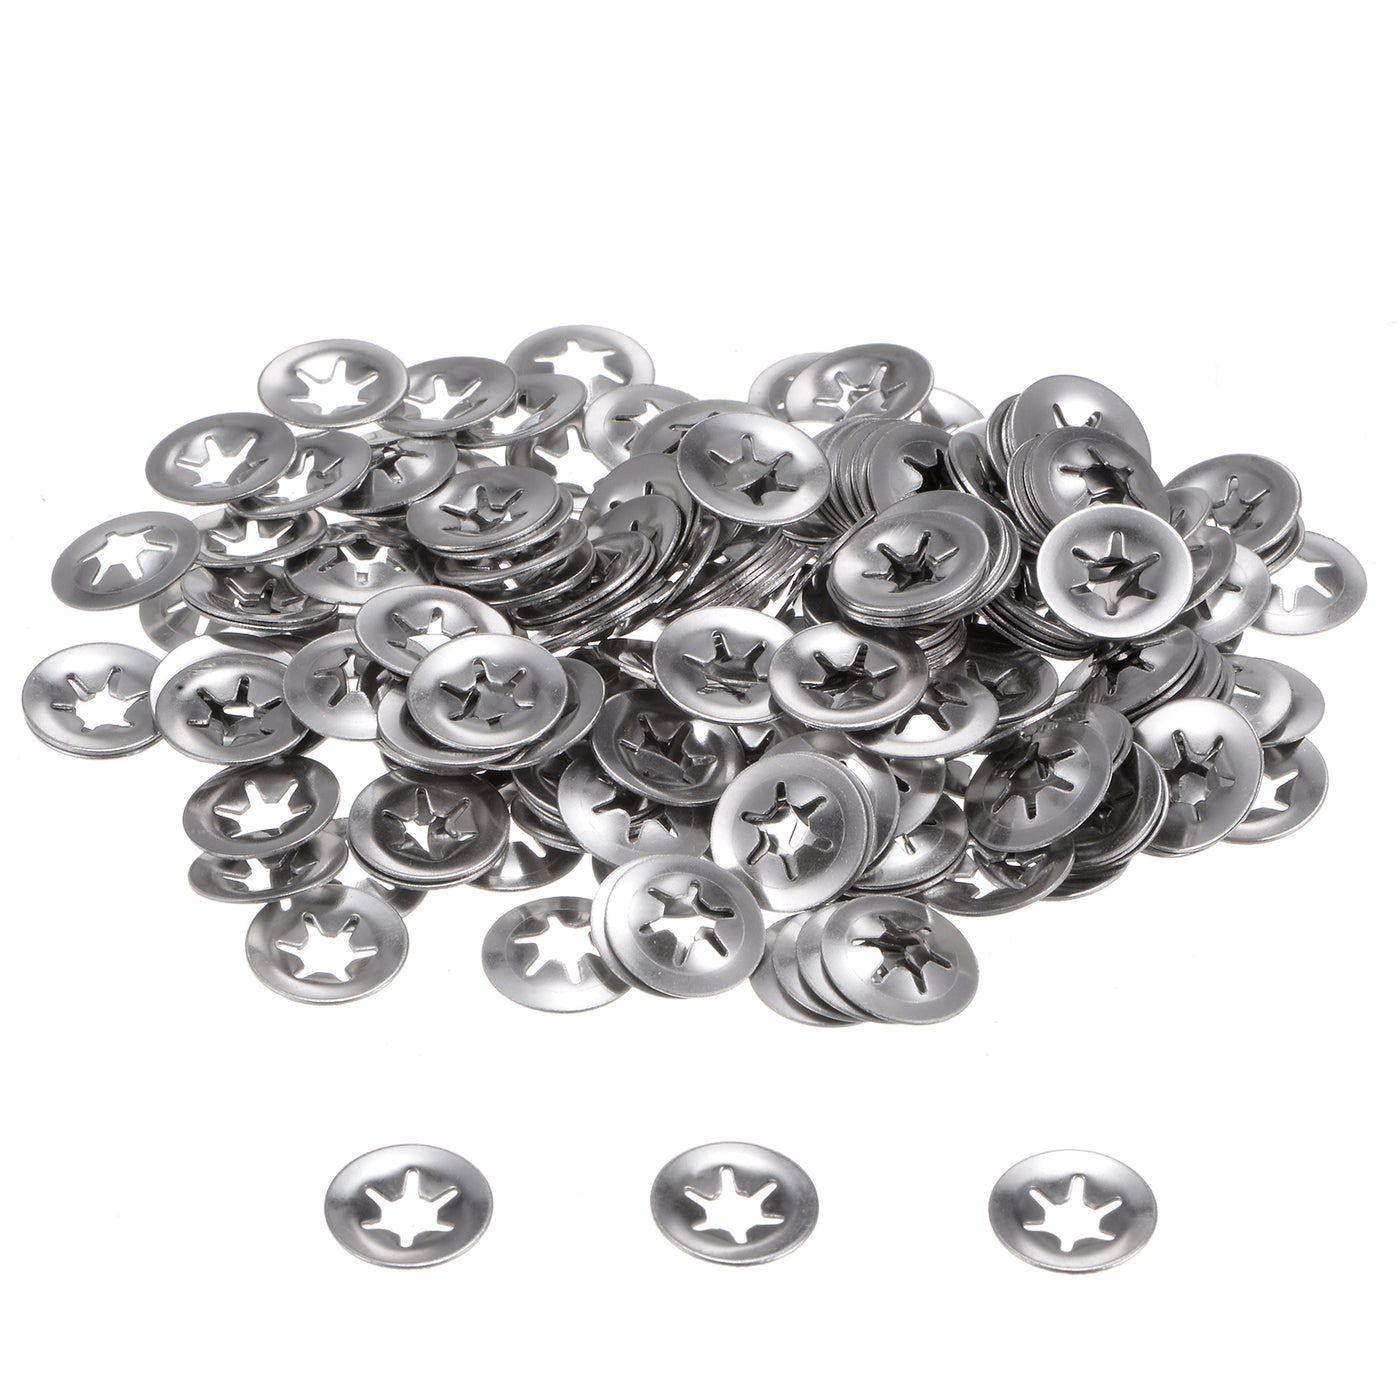 uxcell Uxcell 200pcs Internal Tooth Star Lock Washers M4 Stainless Steel Starlock Push Nuts